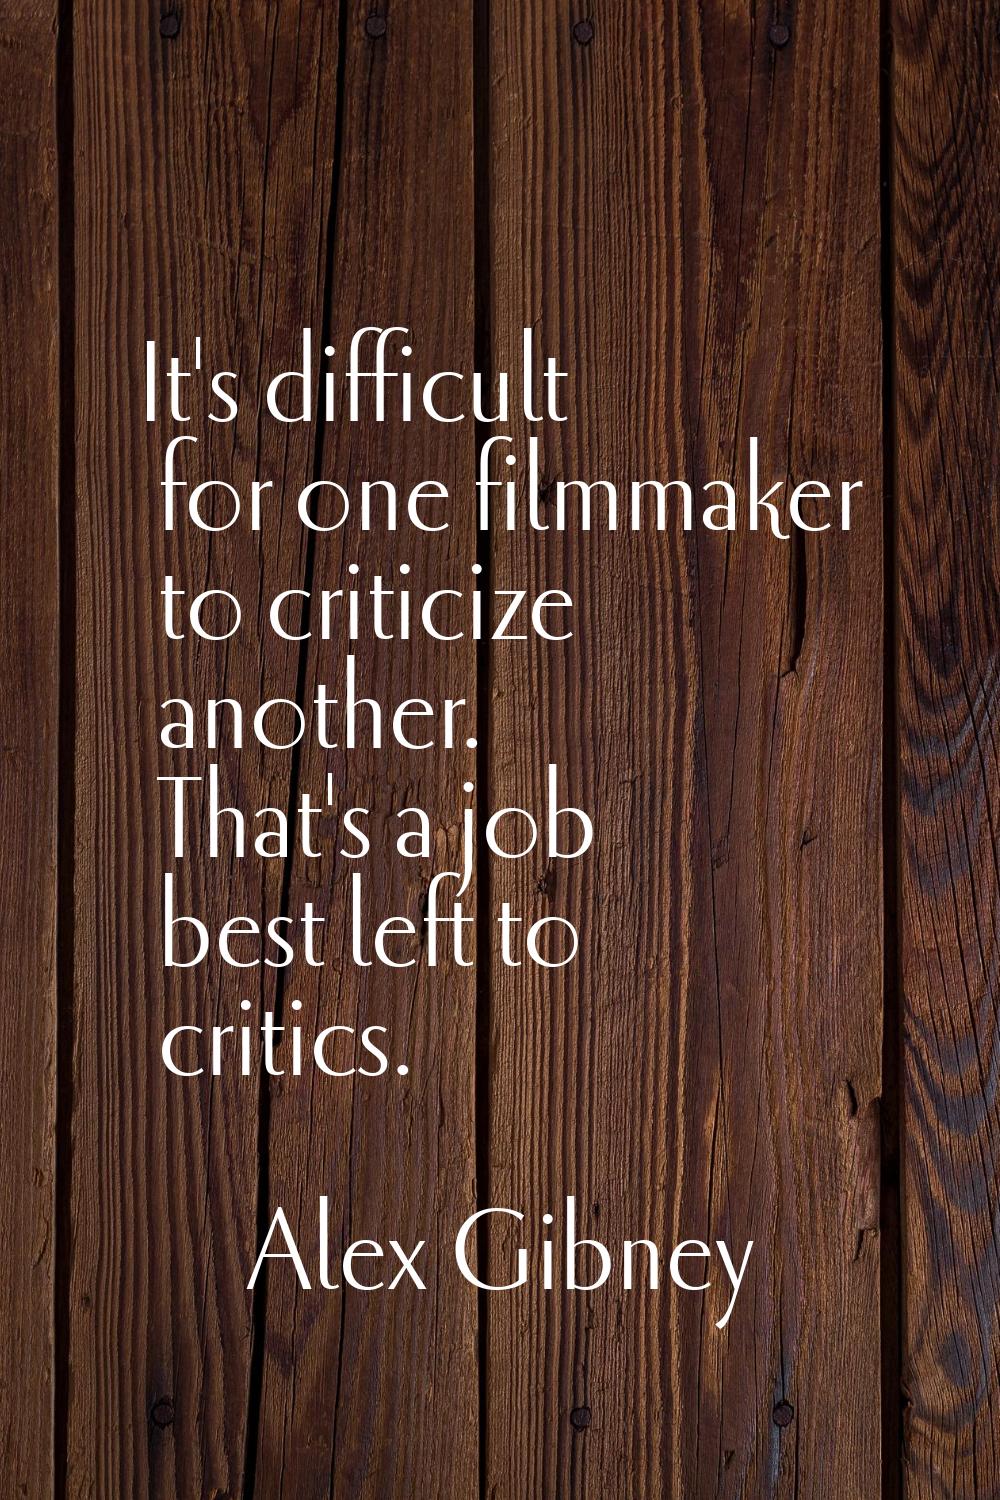 It's difficult for one filmmaker to criticize another. That's a job best left to critics.